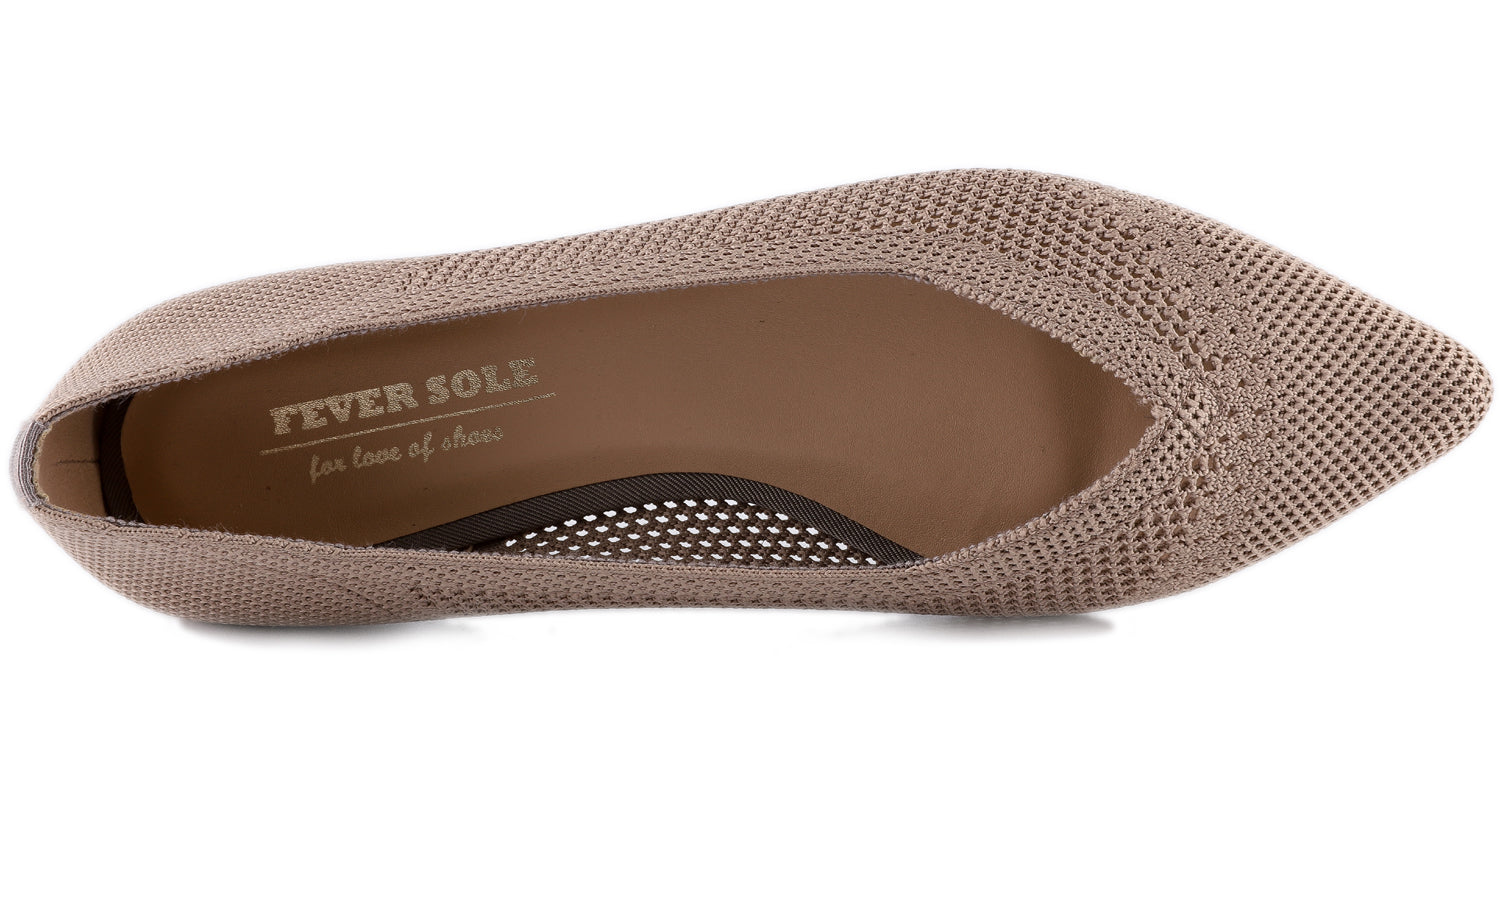 Feversole Women's Woven Fashion Breathable Knit Flat Shoes Pointed Khaki